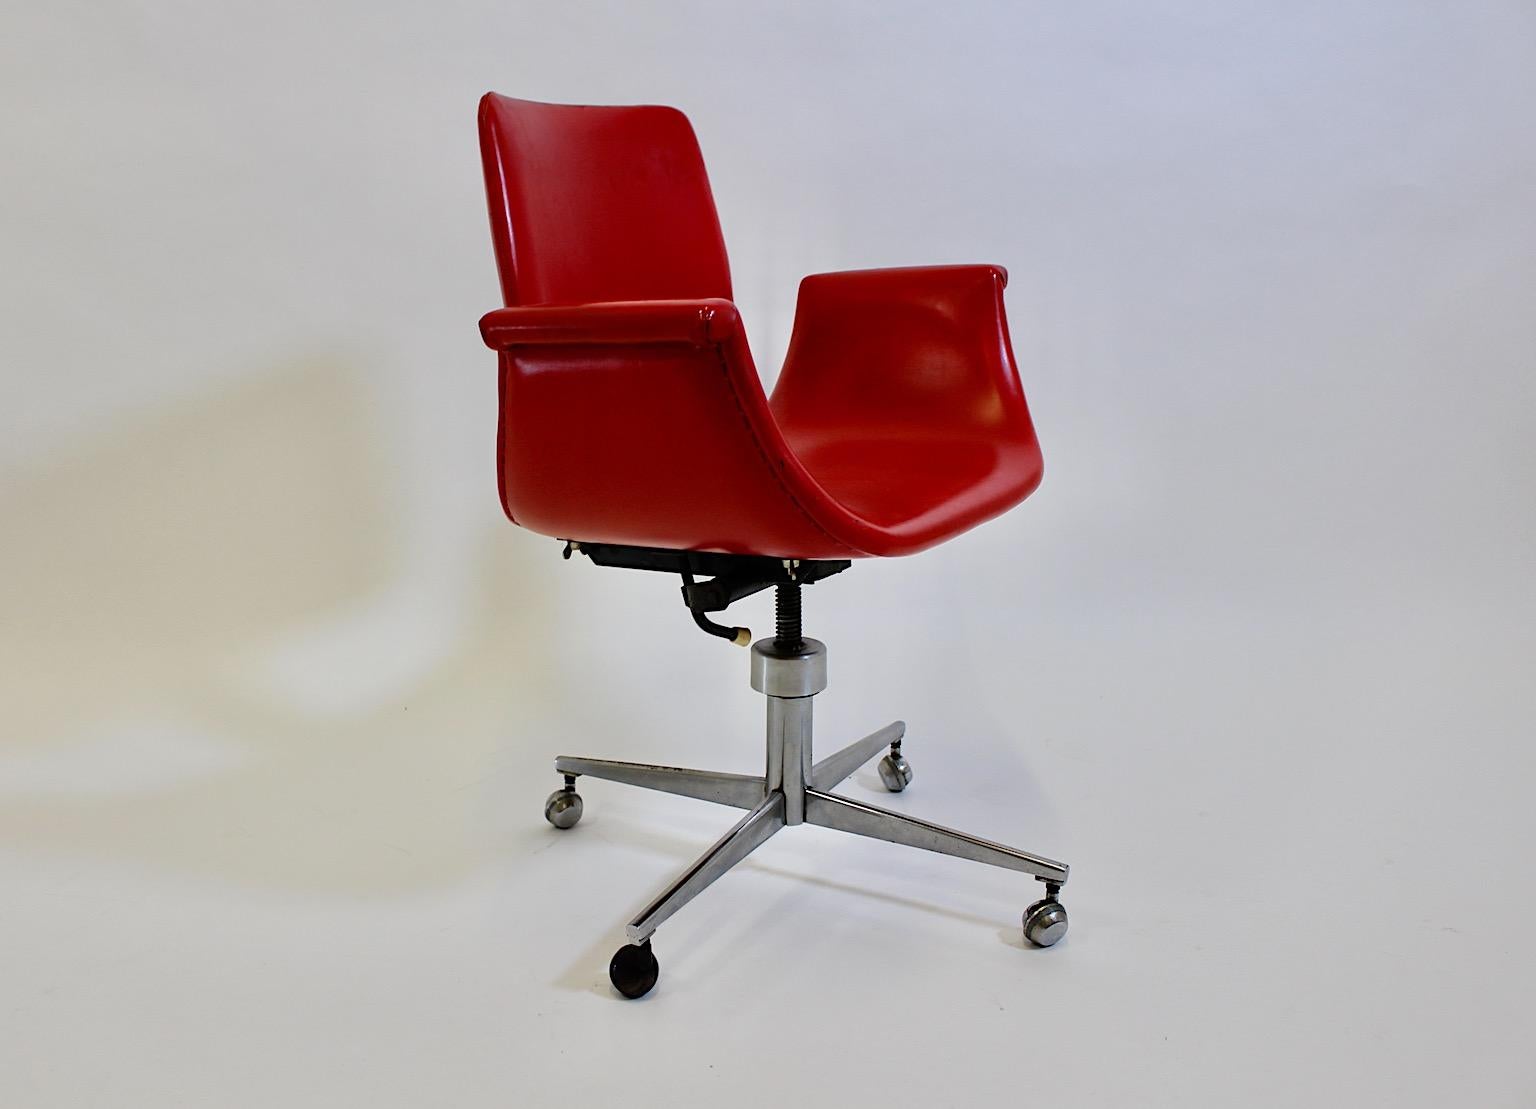 Space Age vintage office chair or desk chair from red faux leather and chrome in tulip shape 1960s.
A fabulous vintage office chair or desk chair with a red curved seat shell in iconic tulip shape covered with red faux leather, while the bottom